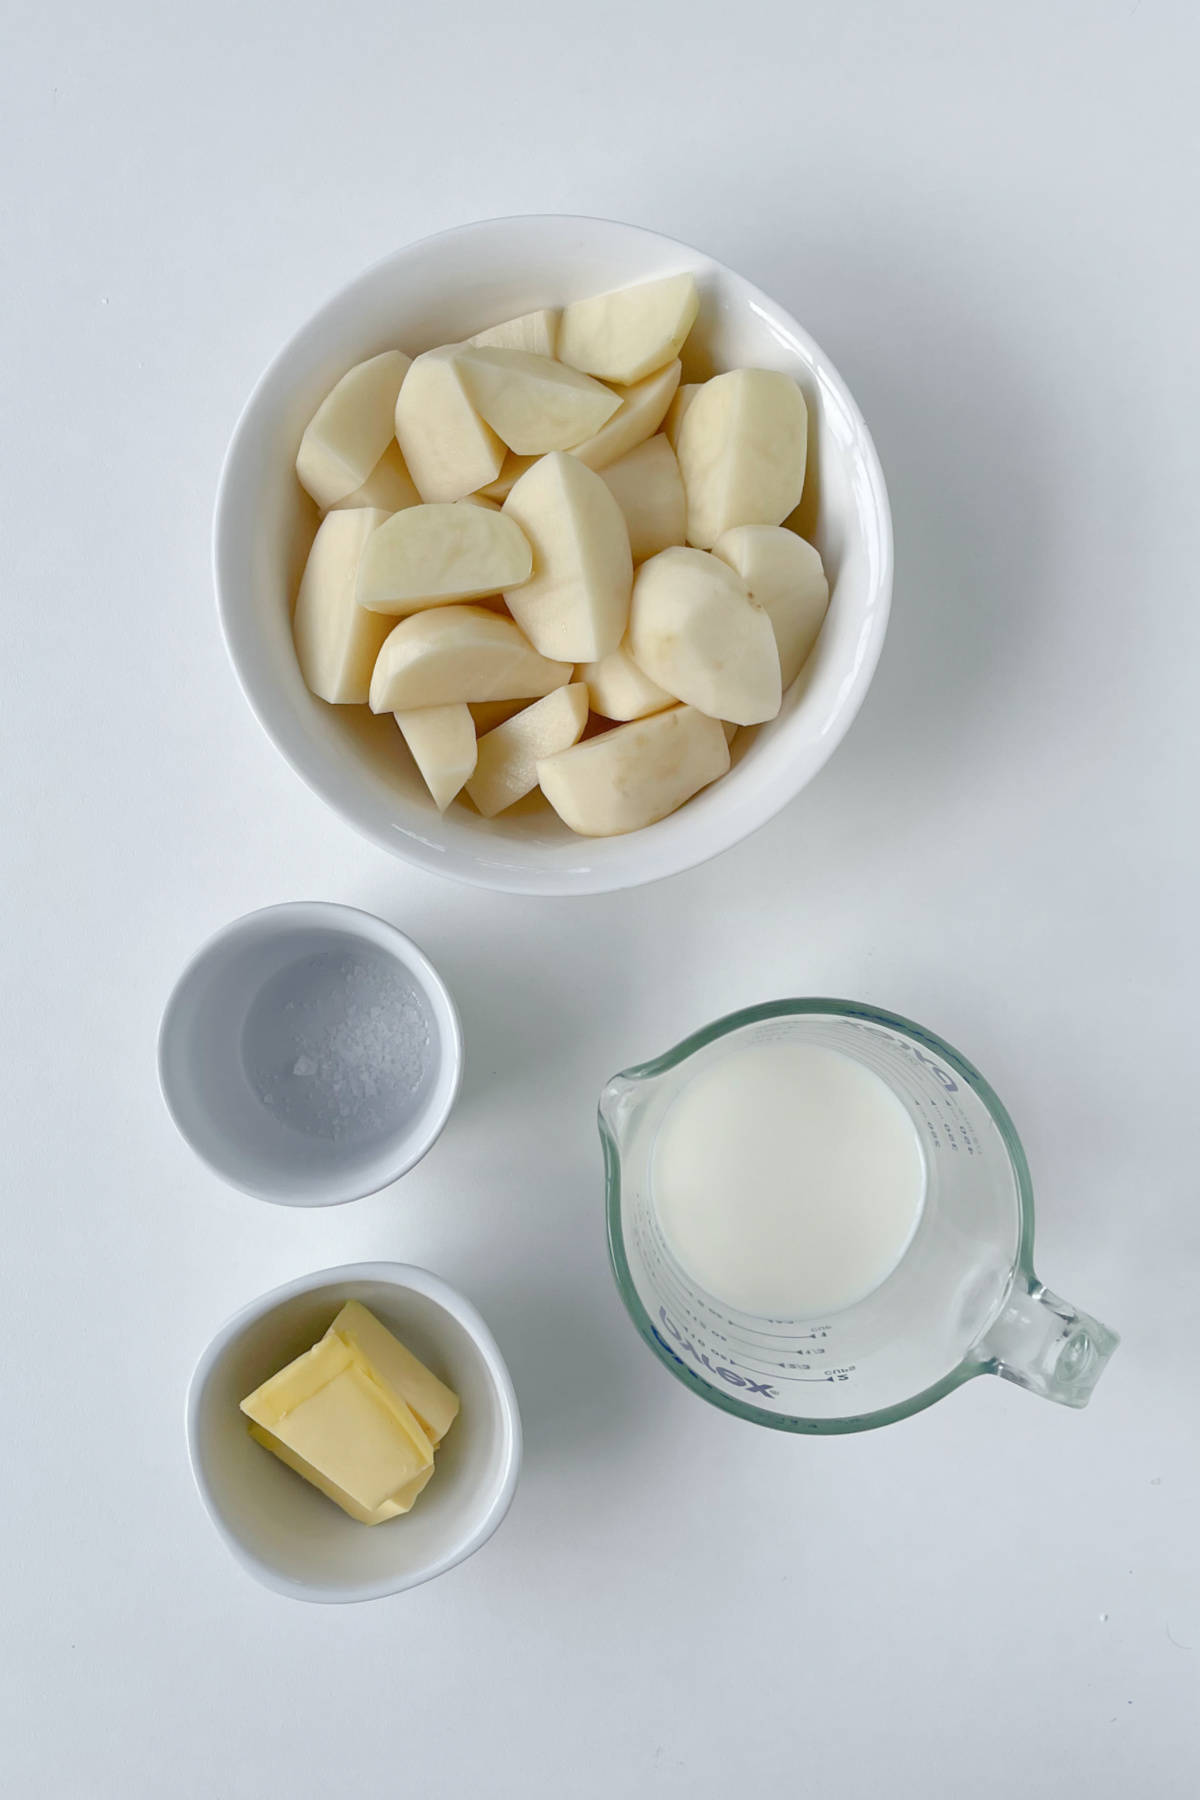 Ingredients to make mashed potatoes in a thermomix on a white bench top.